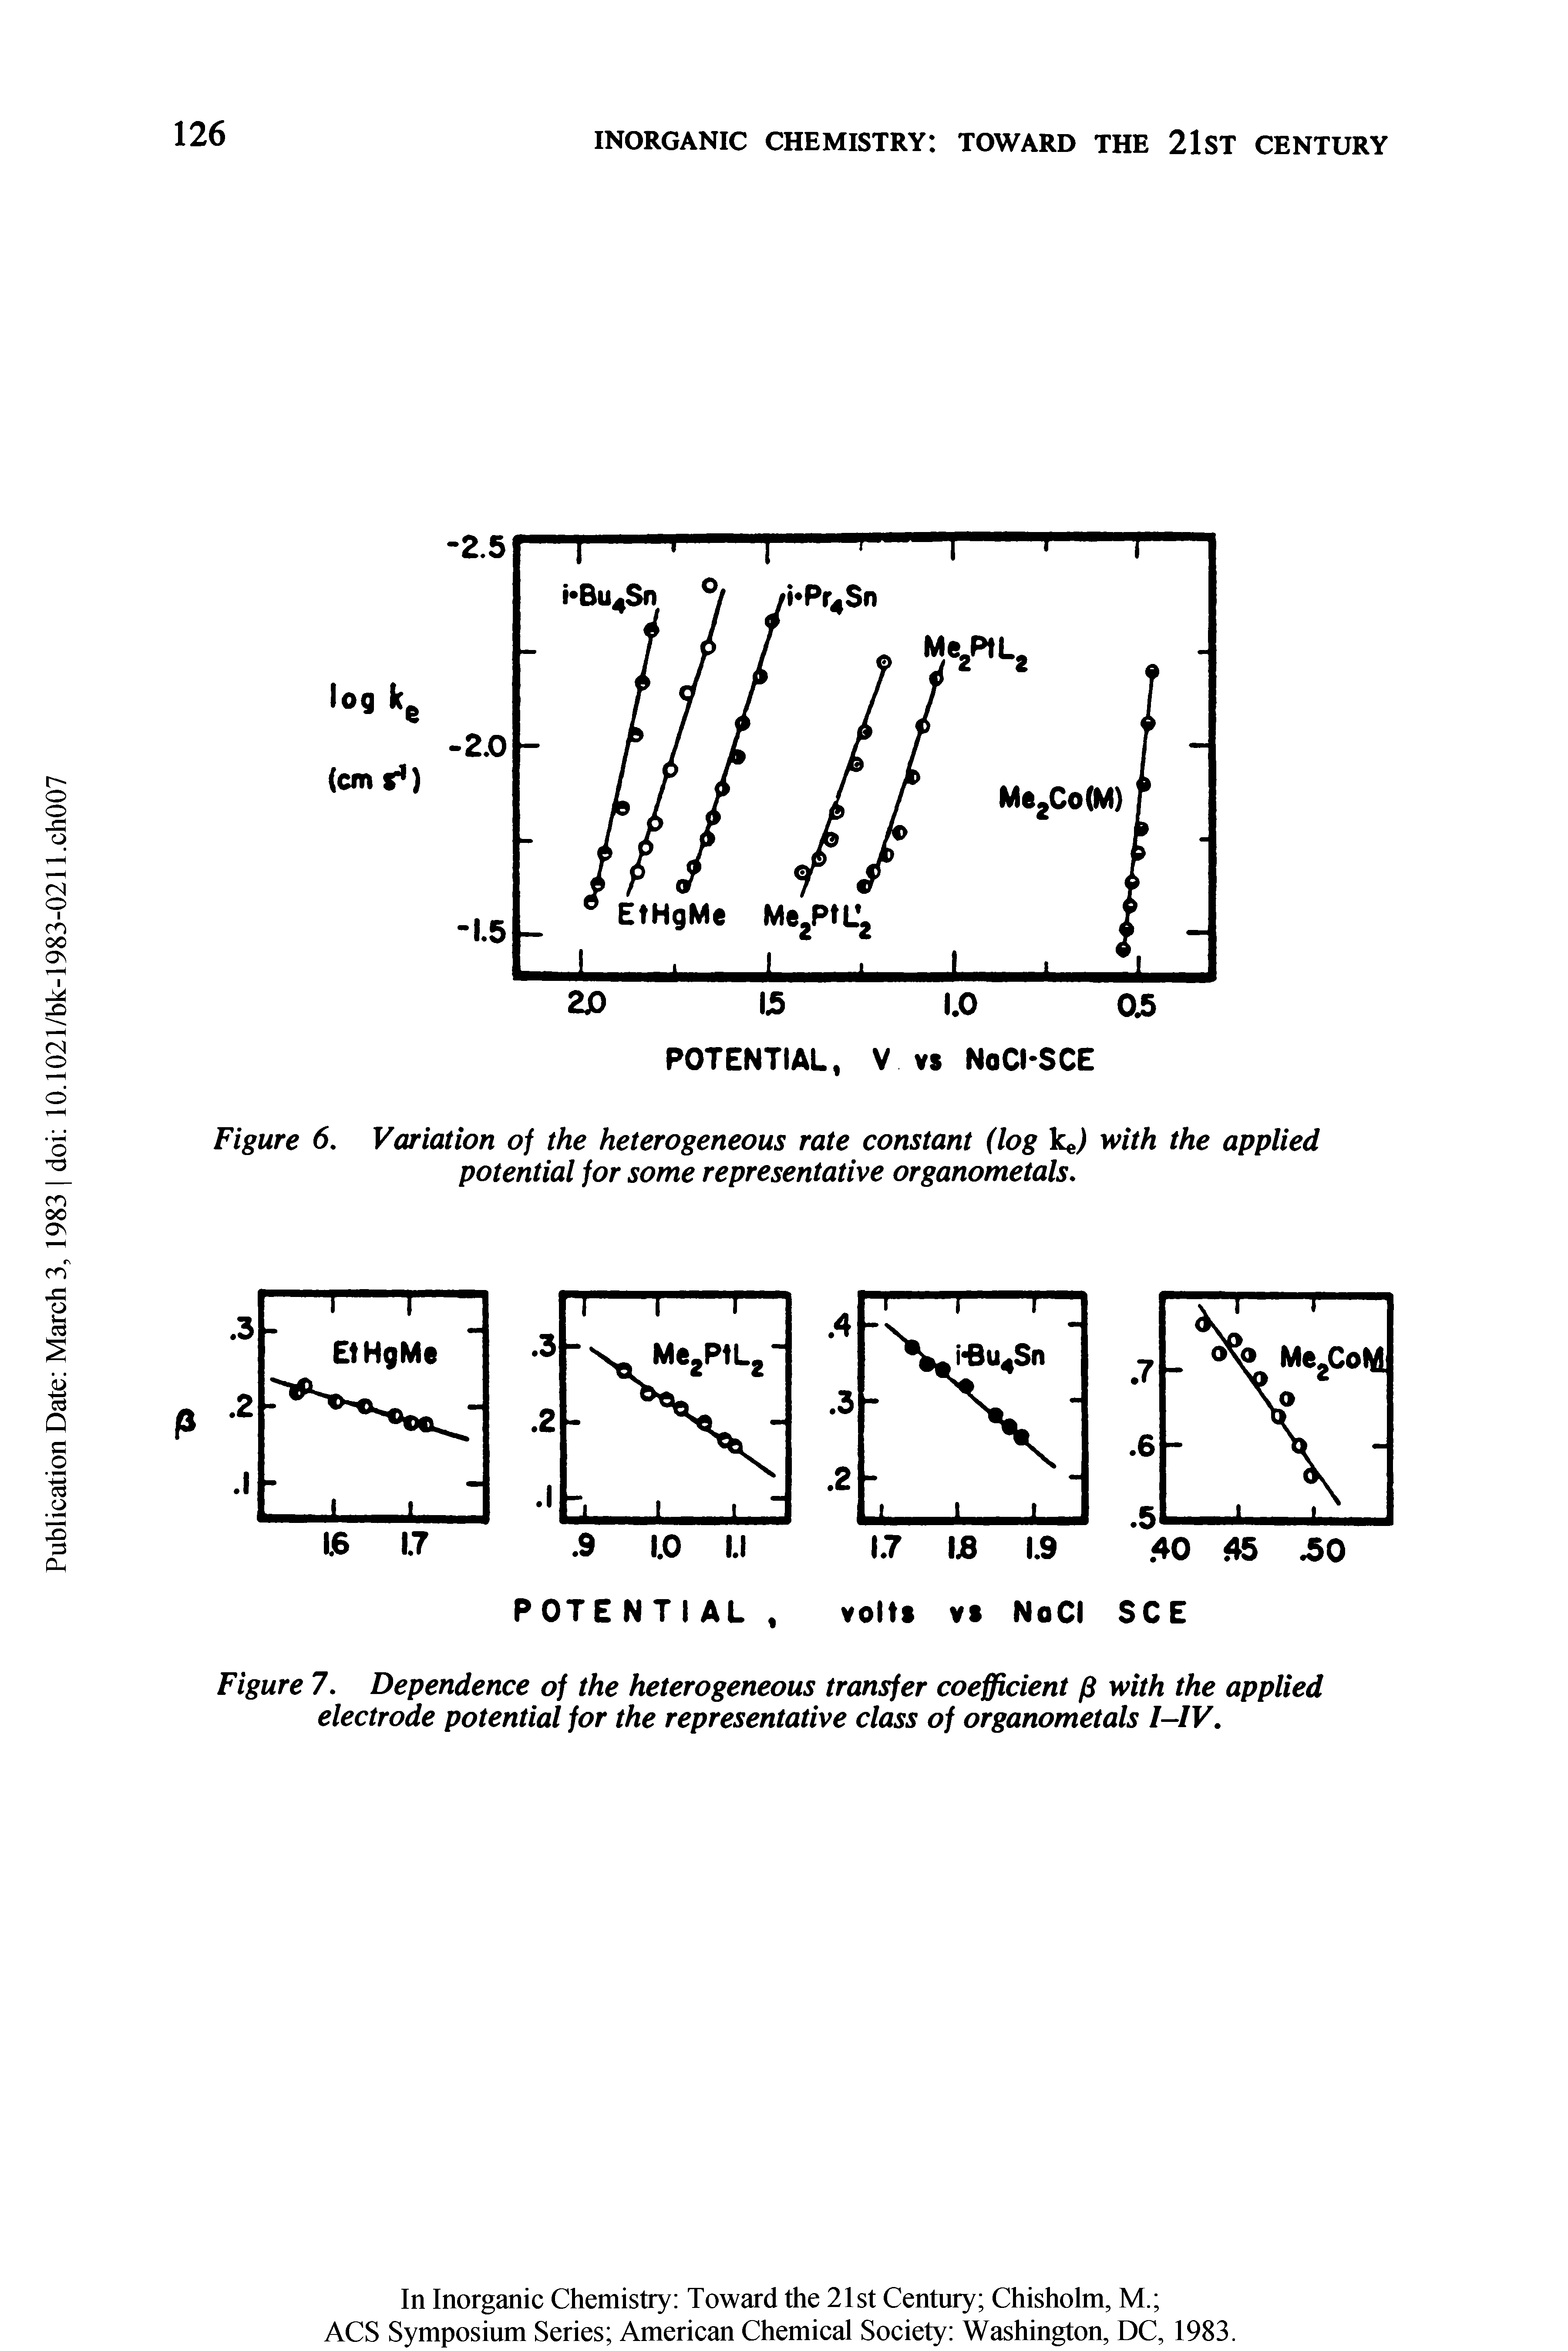 Figure 7. Dependence of the heterogeneous transfer coefficient (5 with the applied electrode potential for the representative class of organometals I-IV.